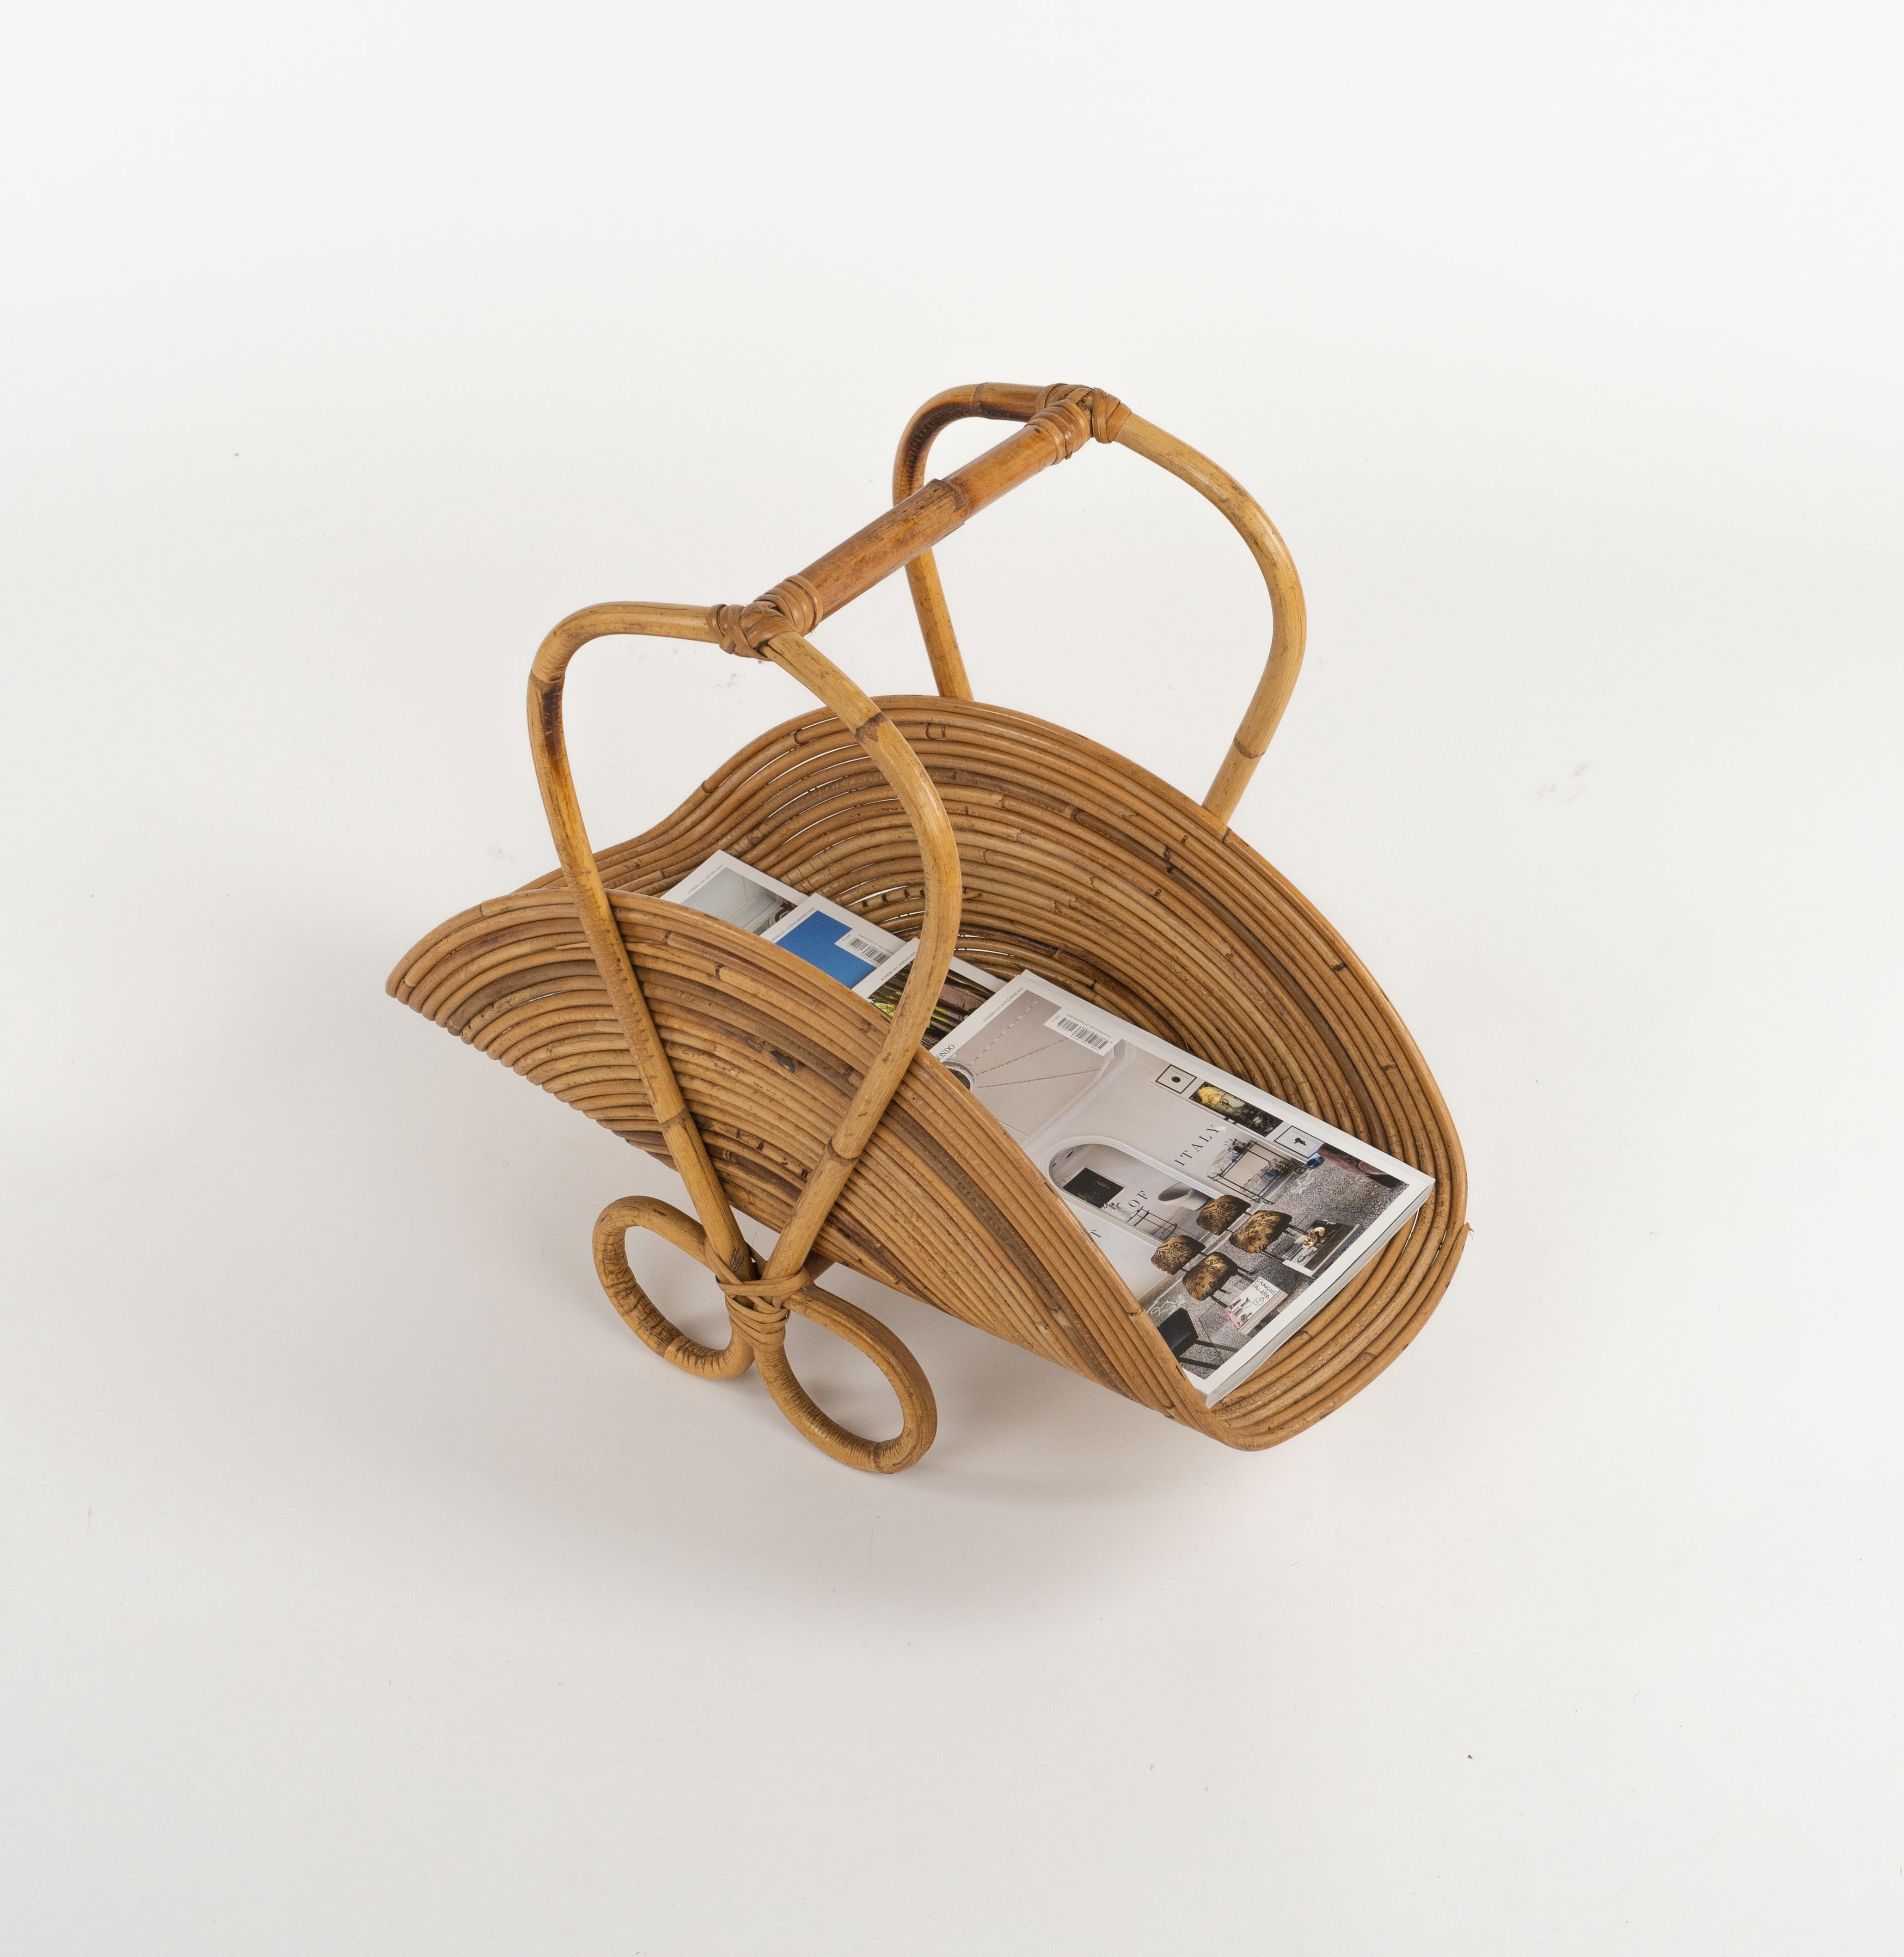 Midcentury Bamboo and Rattan Magazine Rack Vivai Del Sud Style, Italy 1960s For Sale 2